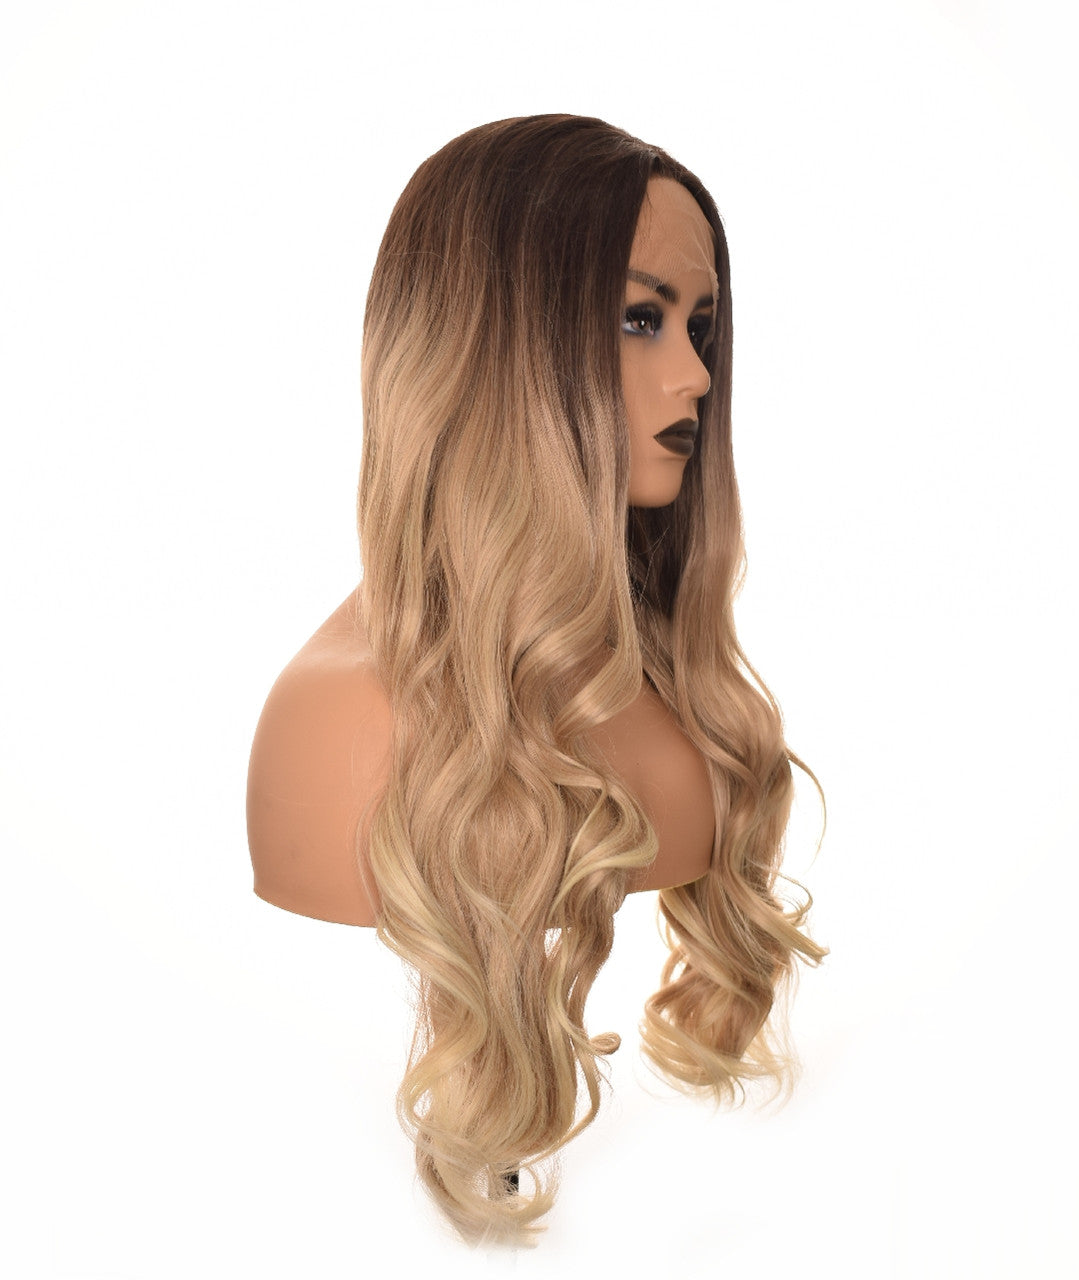 Ombre Long Wavy Brown Blonde Lace Front Wig. 